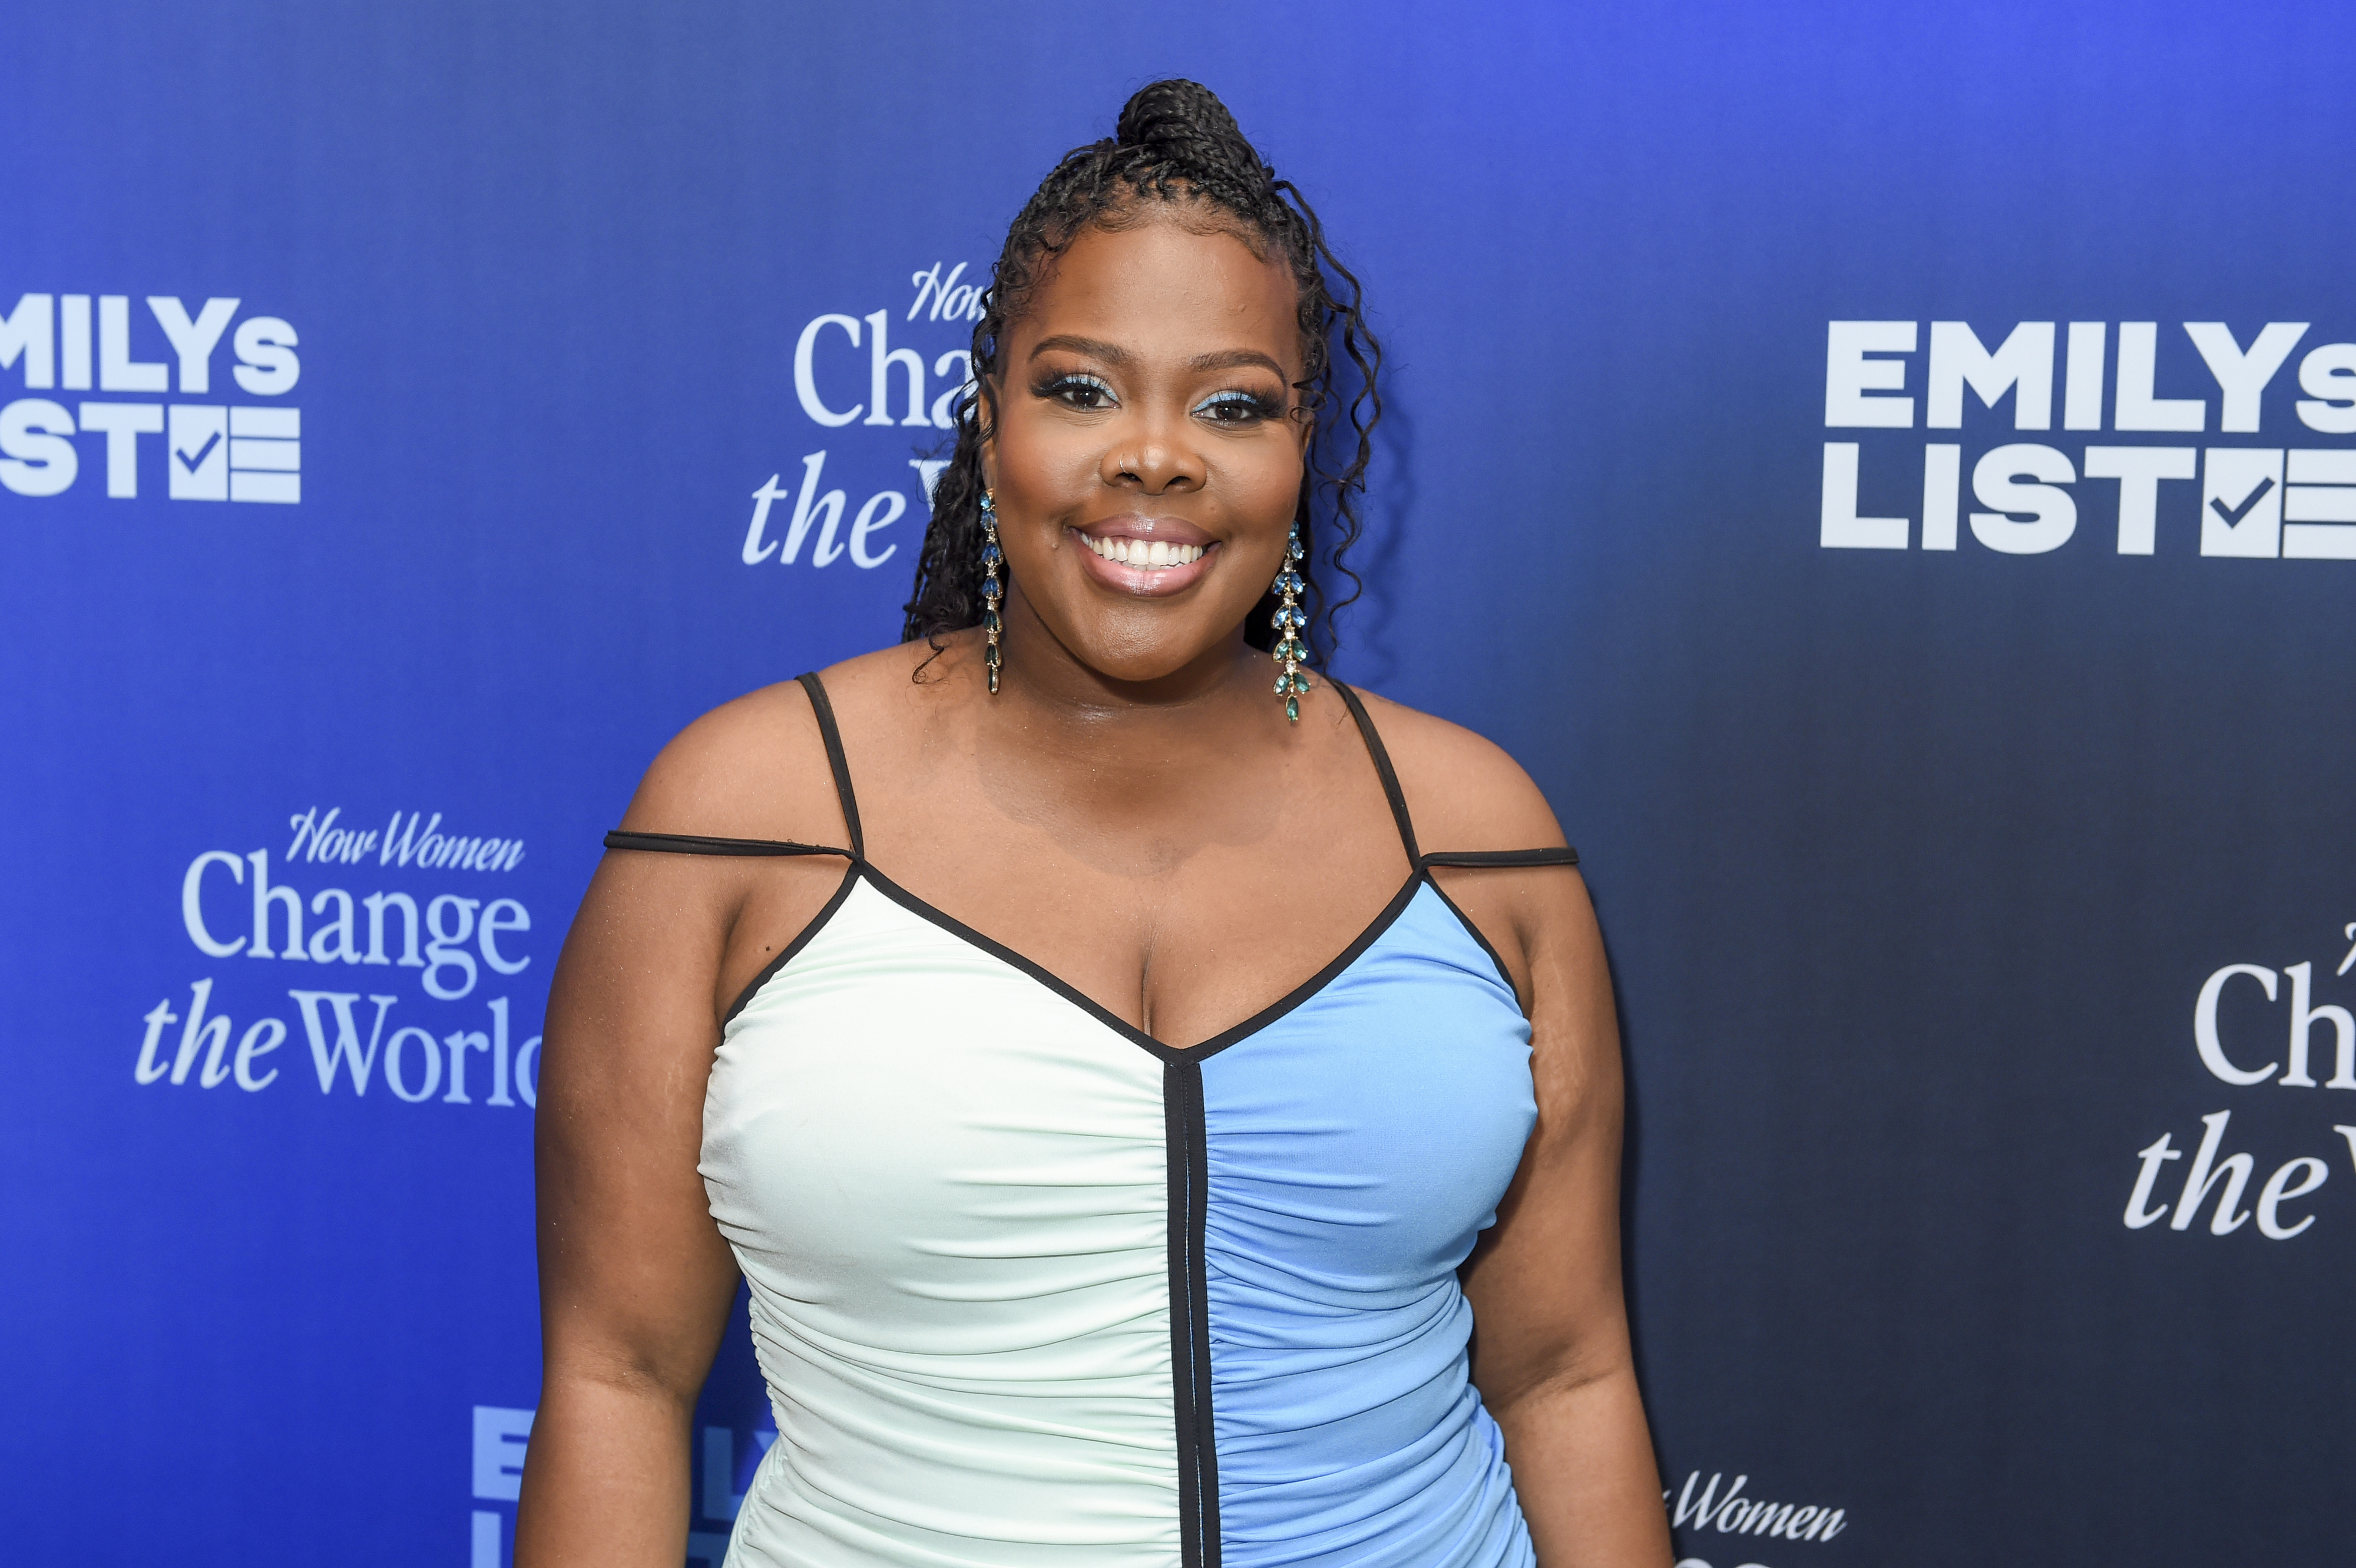 A closeup of Amber Riley smiling on the red carpet of a media event